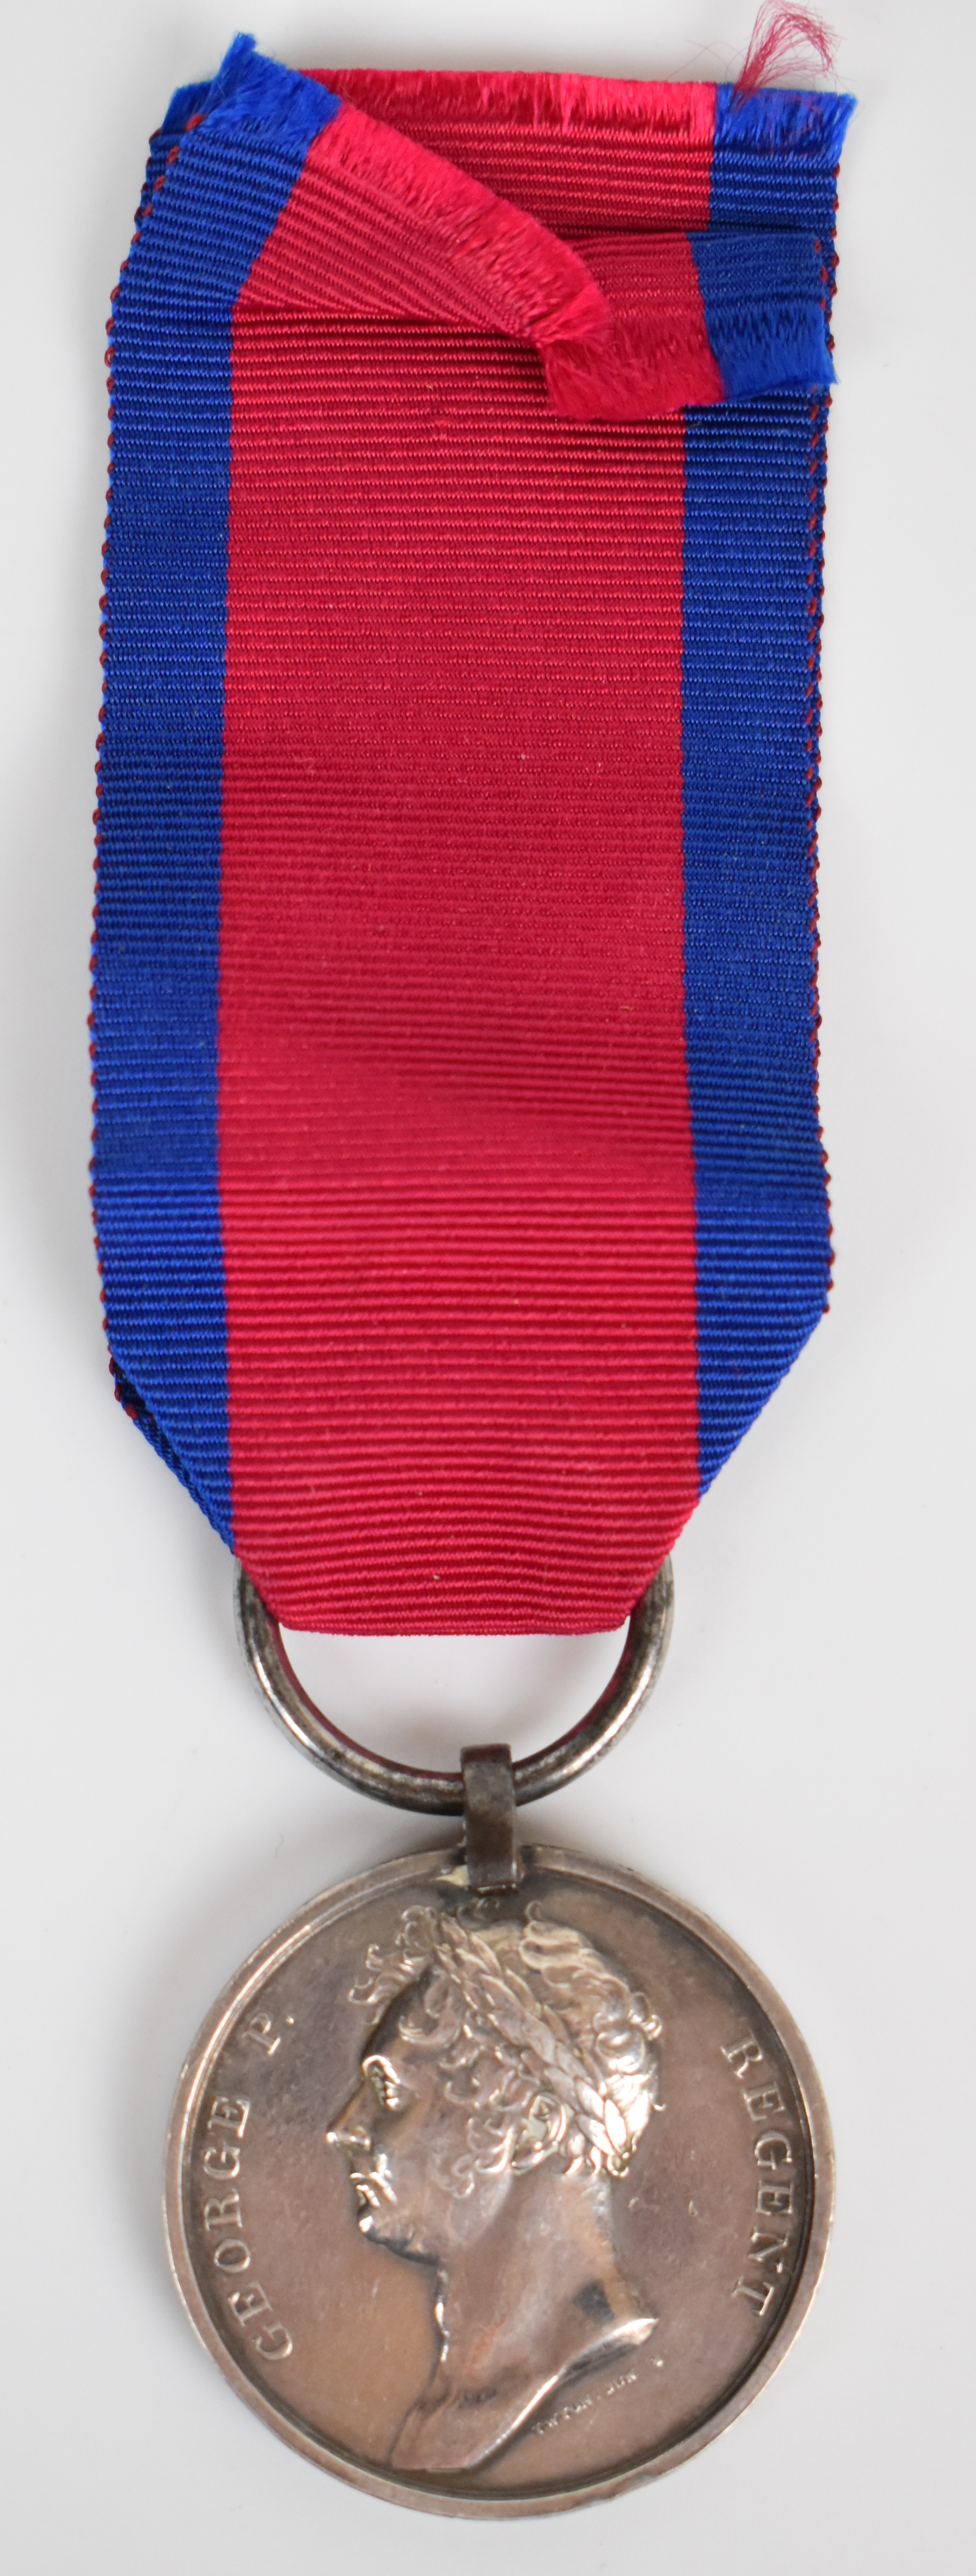 Waterloo Medal named to John Lyford, 3rd Battalion 14th Regiment of Foot - Image 4 of 4